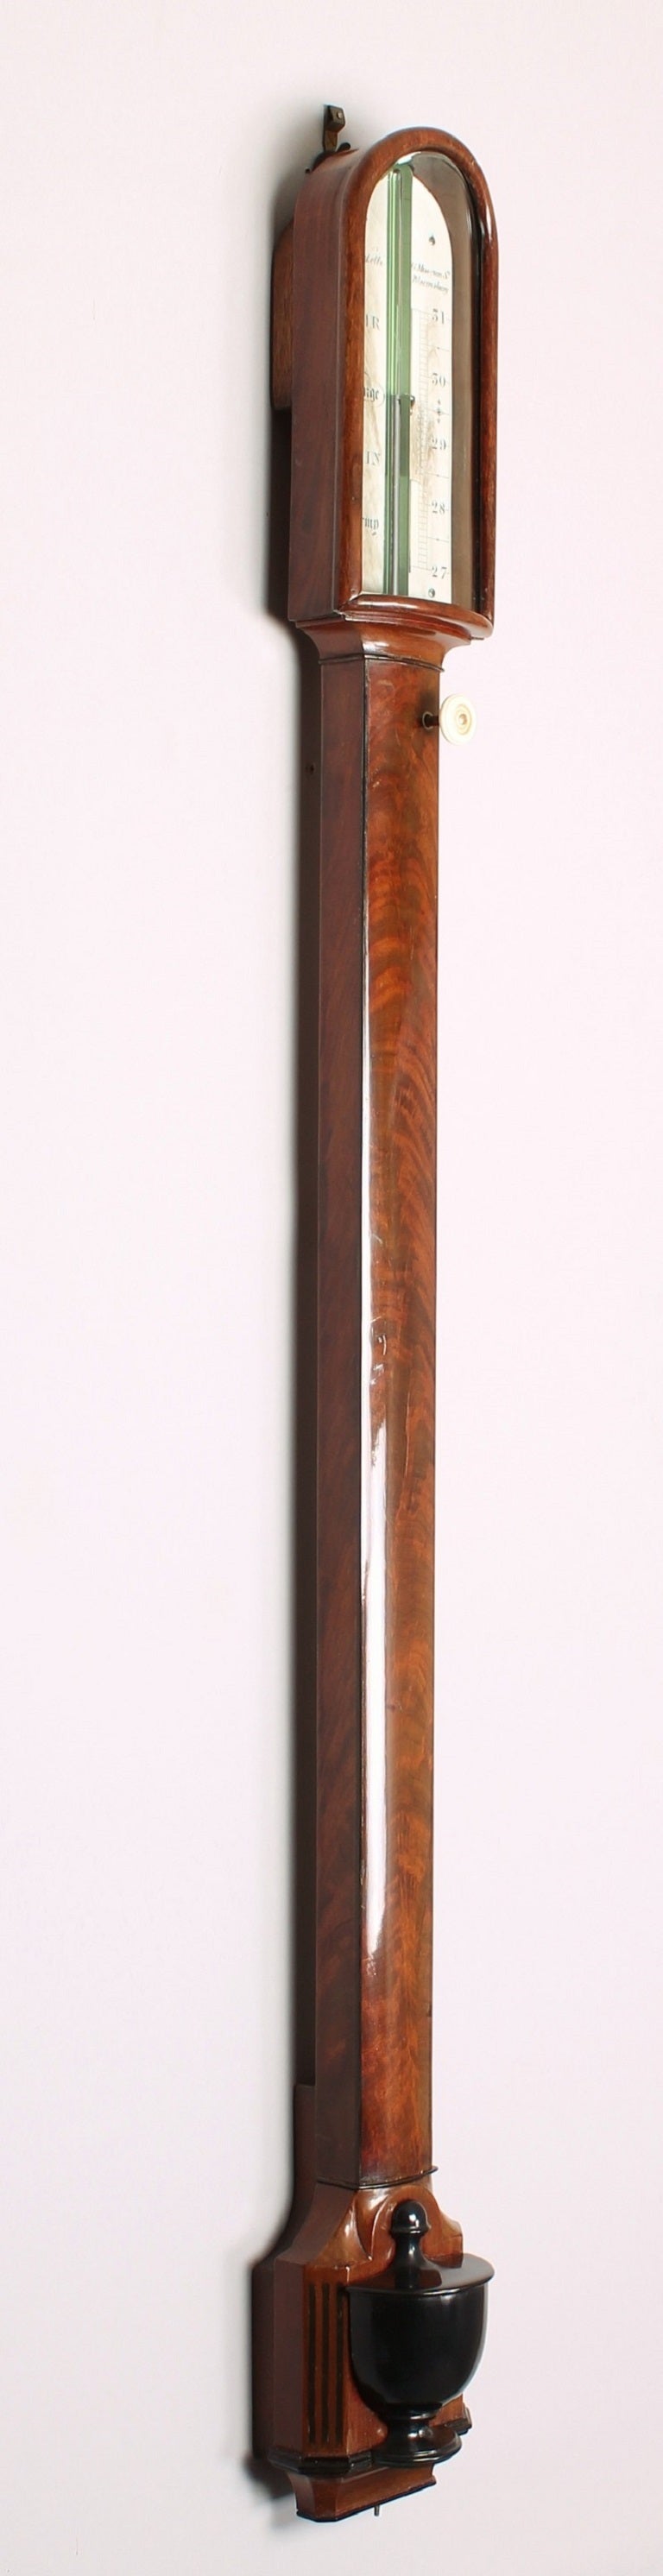 Fine early 19th century stick barometer by J. Ronketti, 15 Museum St., Bloomsbury; the richly-coloured bow-fronted mahogany case with ebony stringing, the ivory registers enclosed by an arched front with bowed glass and fitted with an ivory-knob